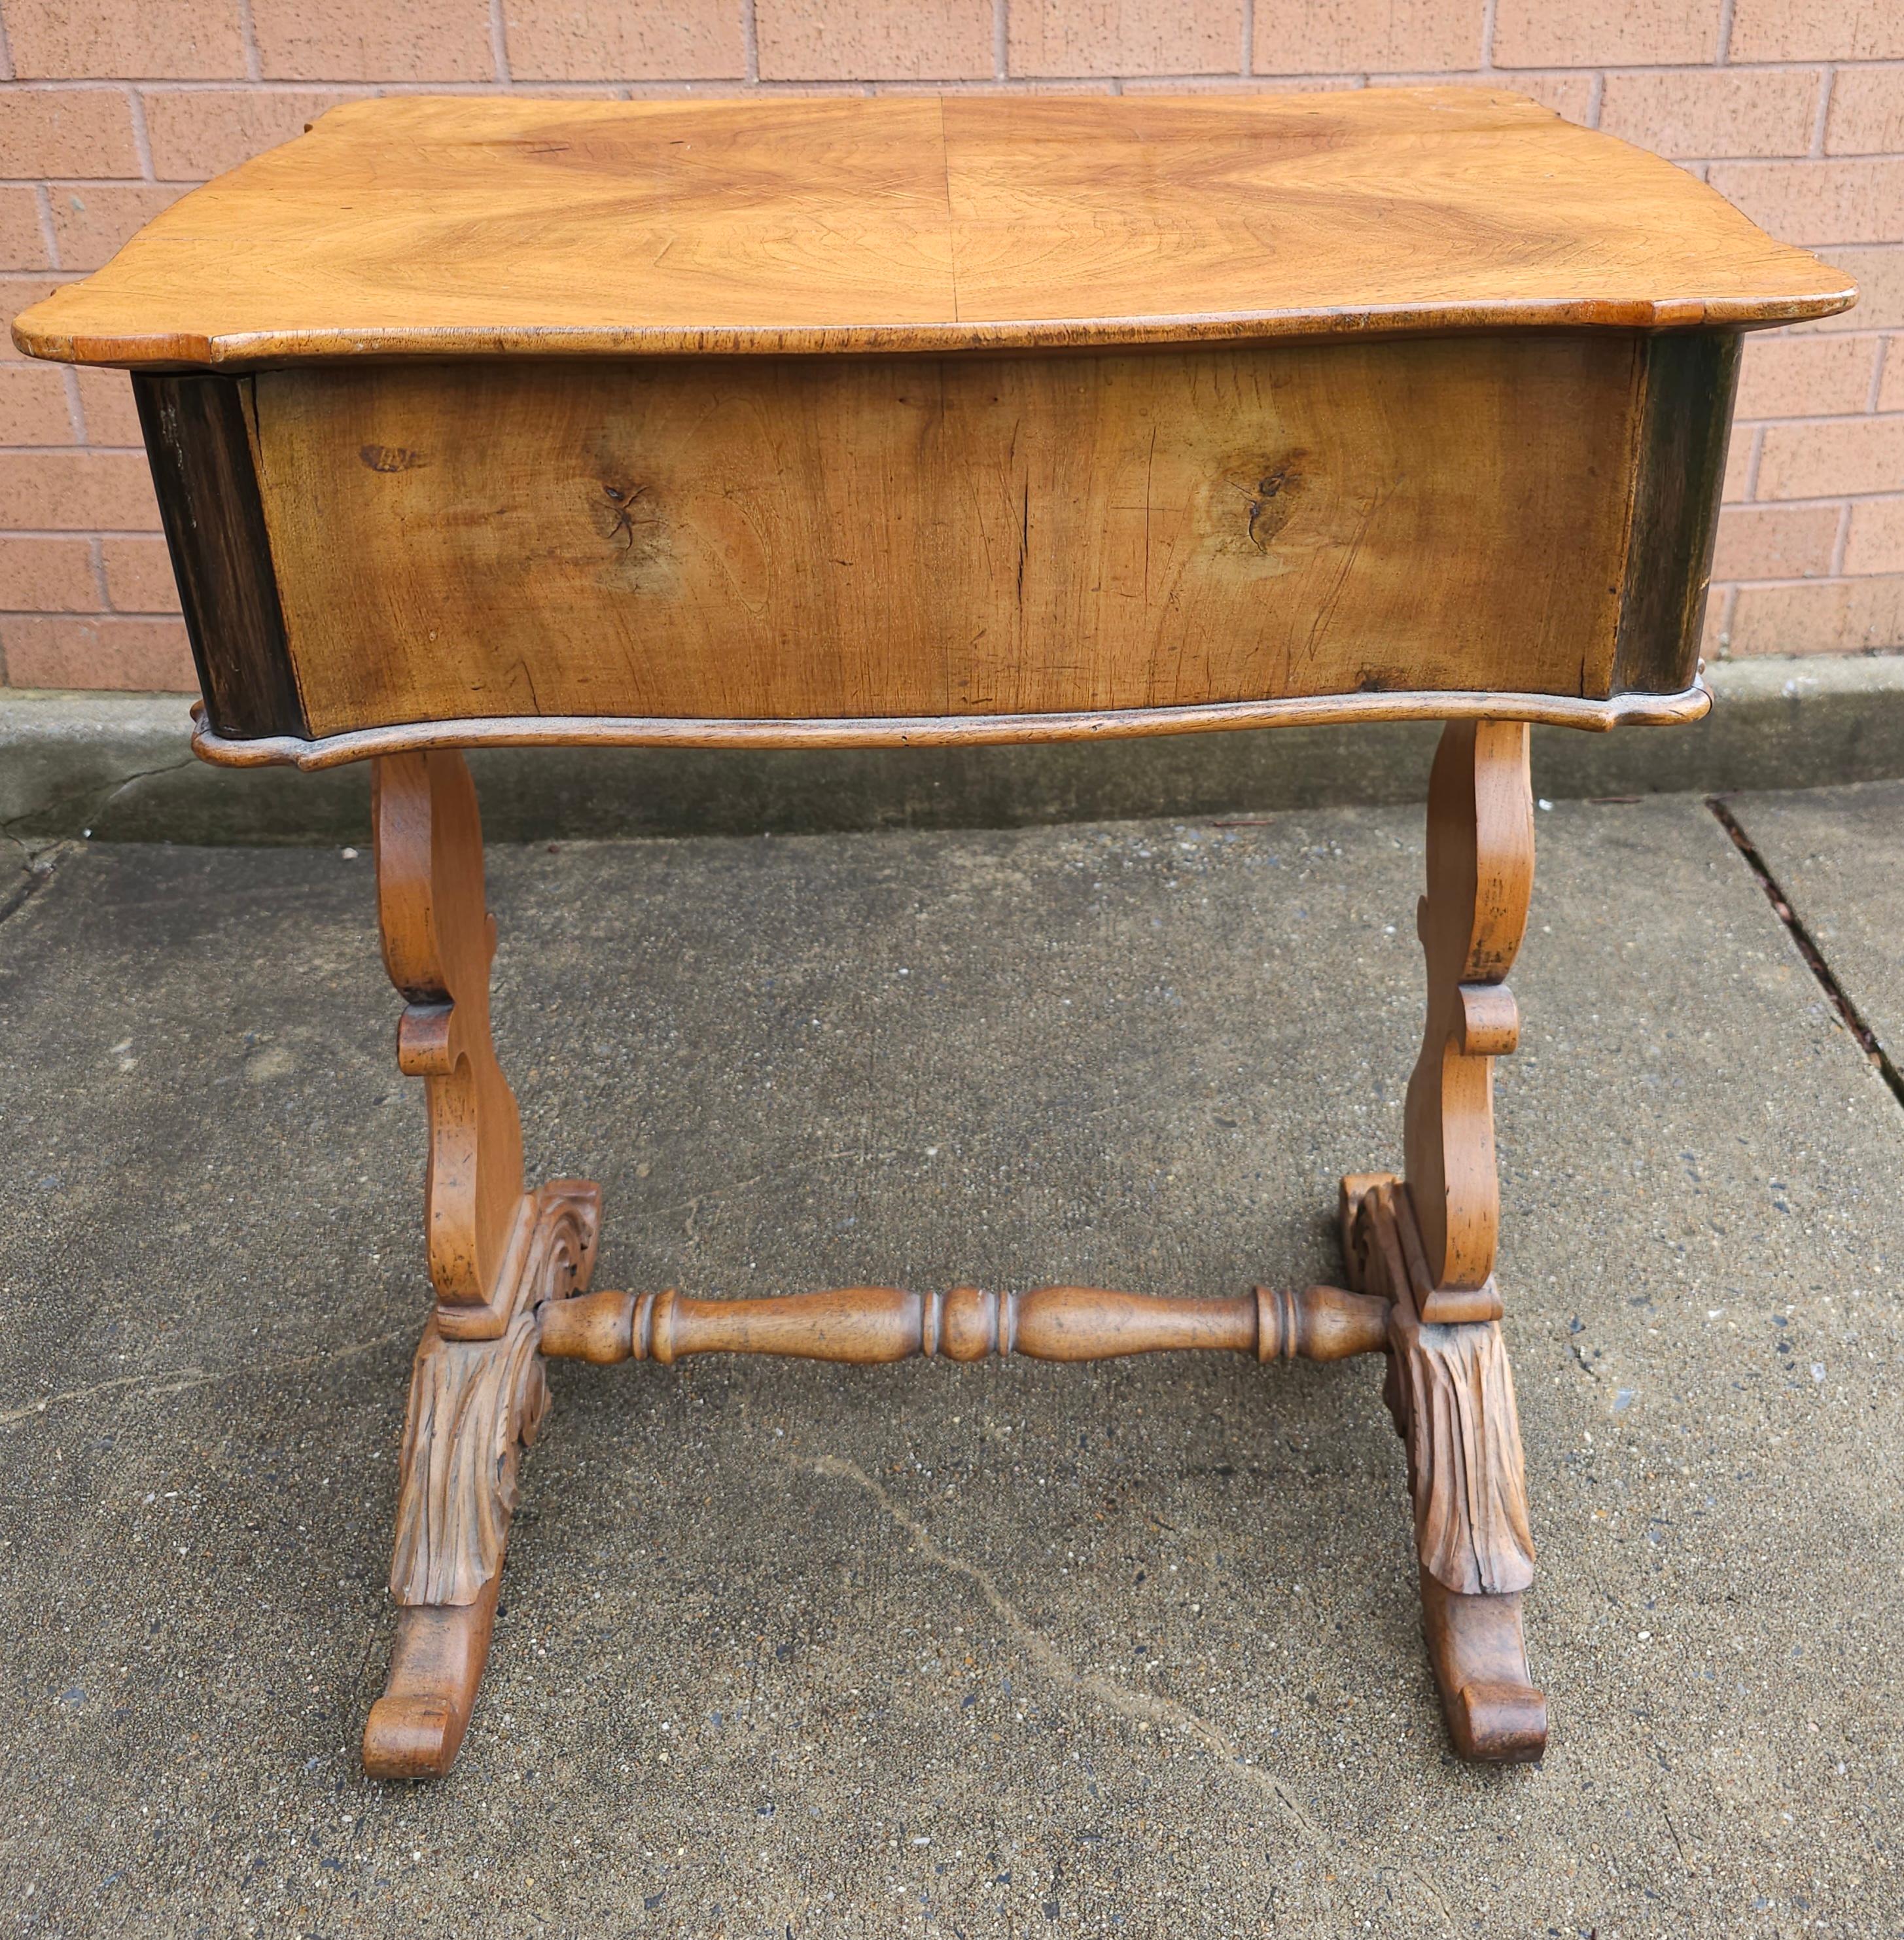 Late 18th Century William IV Style Refinished Mahogany Two Drawer Sewing Table or  Work Table.
Measures 25